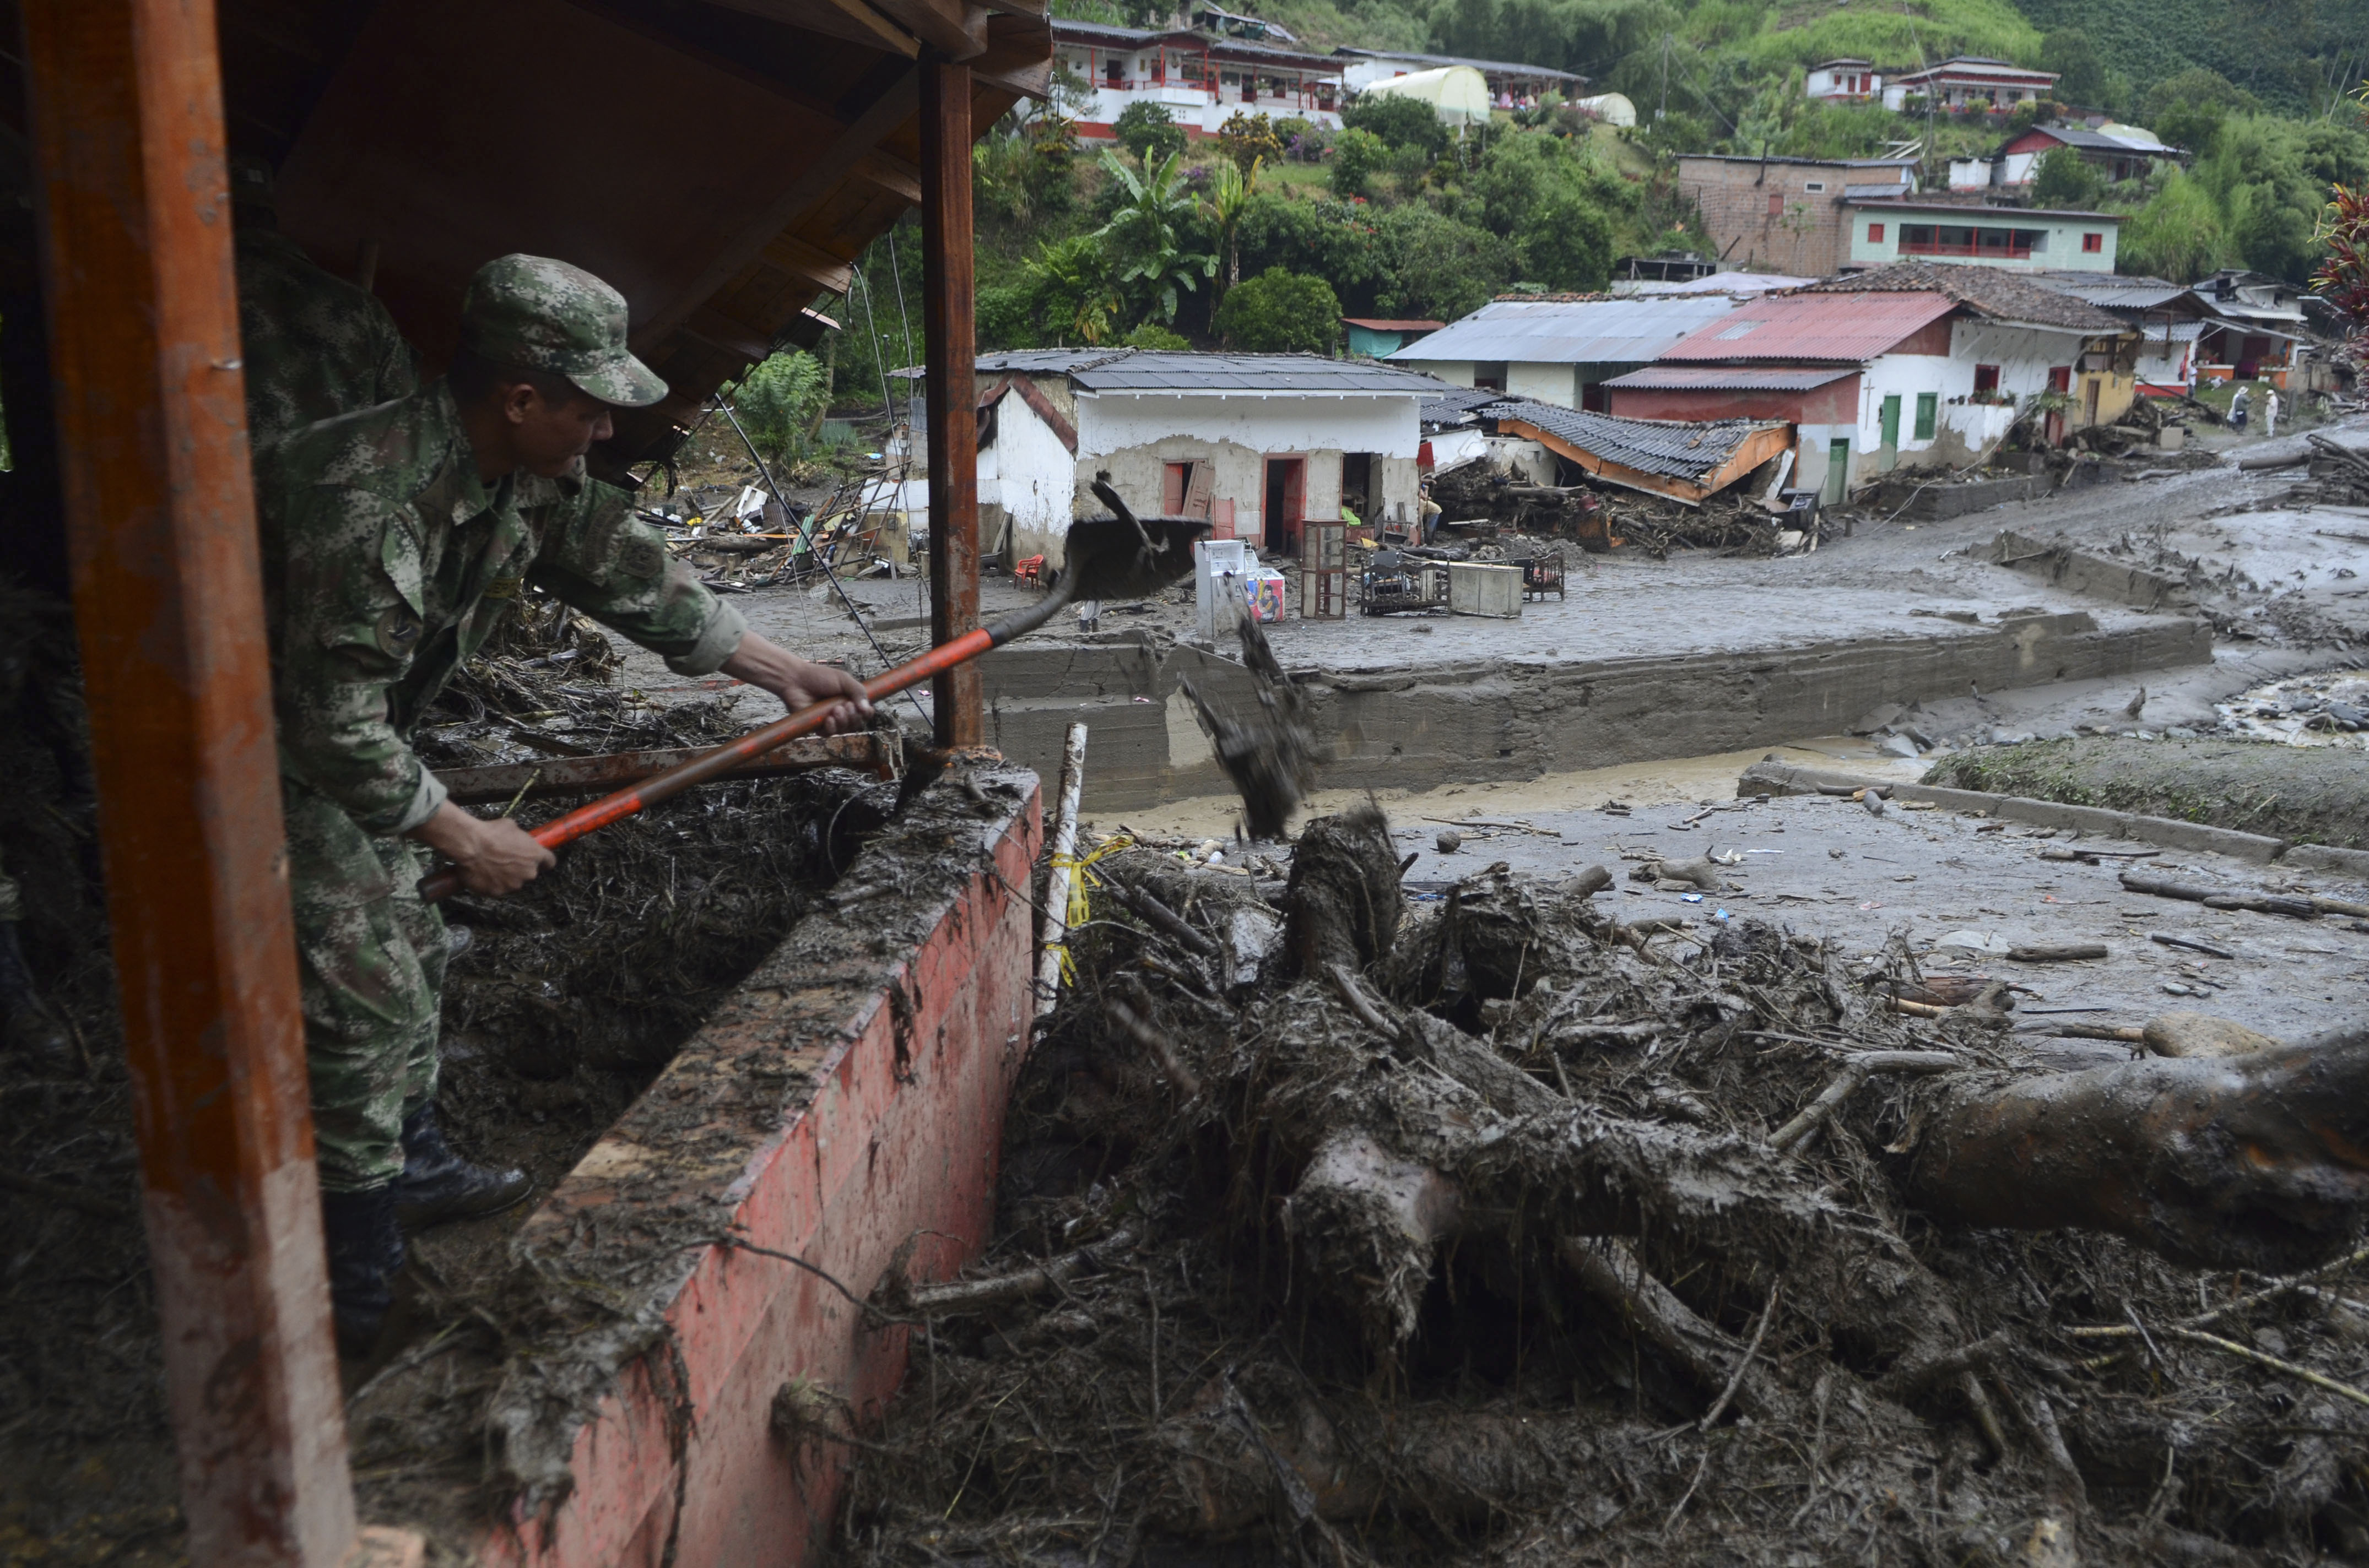 A soldier shovels mud from a house damaged by a mudslide in Salgar, in Colombia's northwestern state of Antioquia, May 19, 2015. (Luis Benavides—Associated Press)